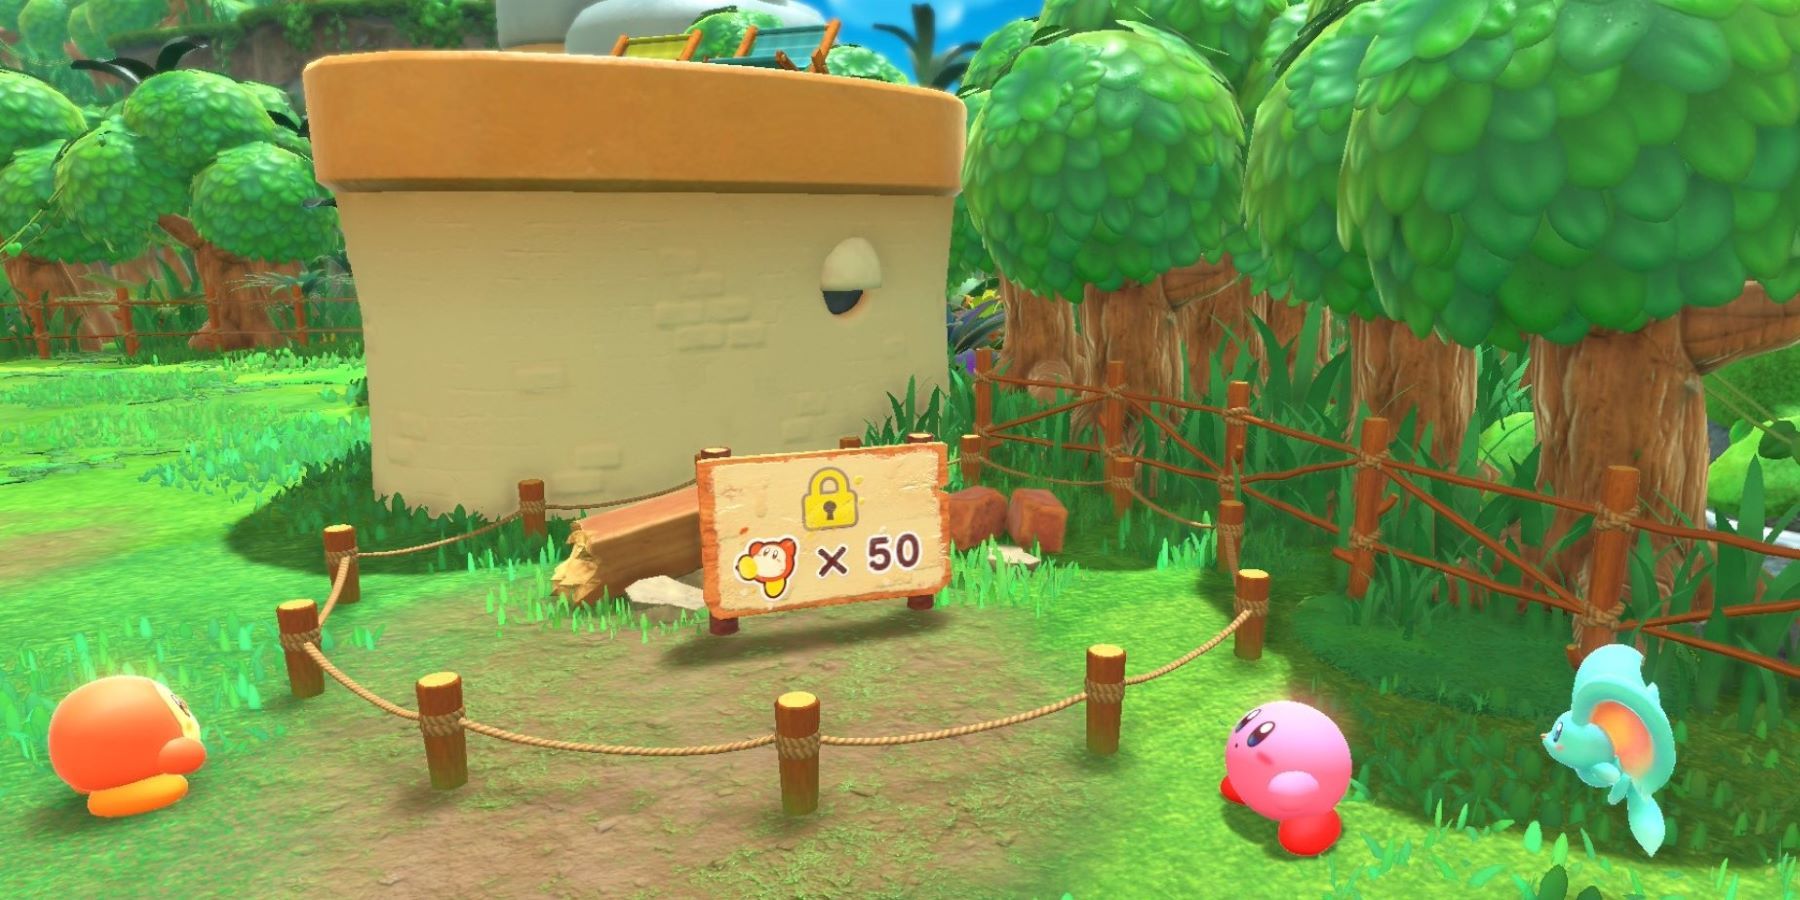 Kirby, Elfilin, and a Waddle Dee looking at the future site of Kirby's house in Kirby and the Forgotten Land's Waddle Dee Town